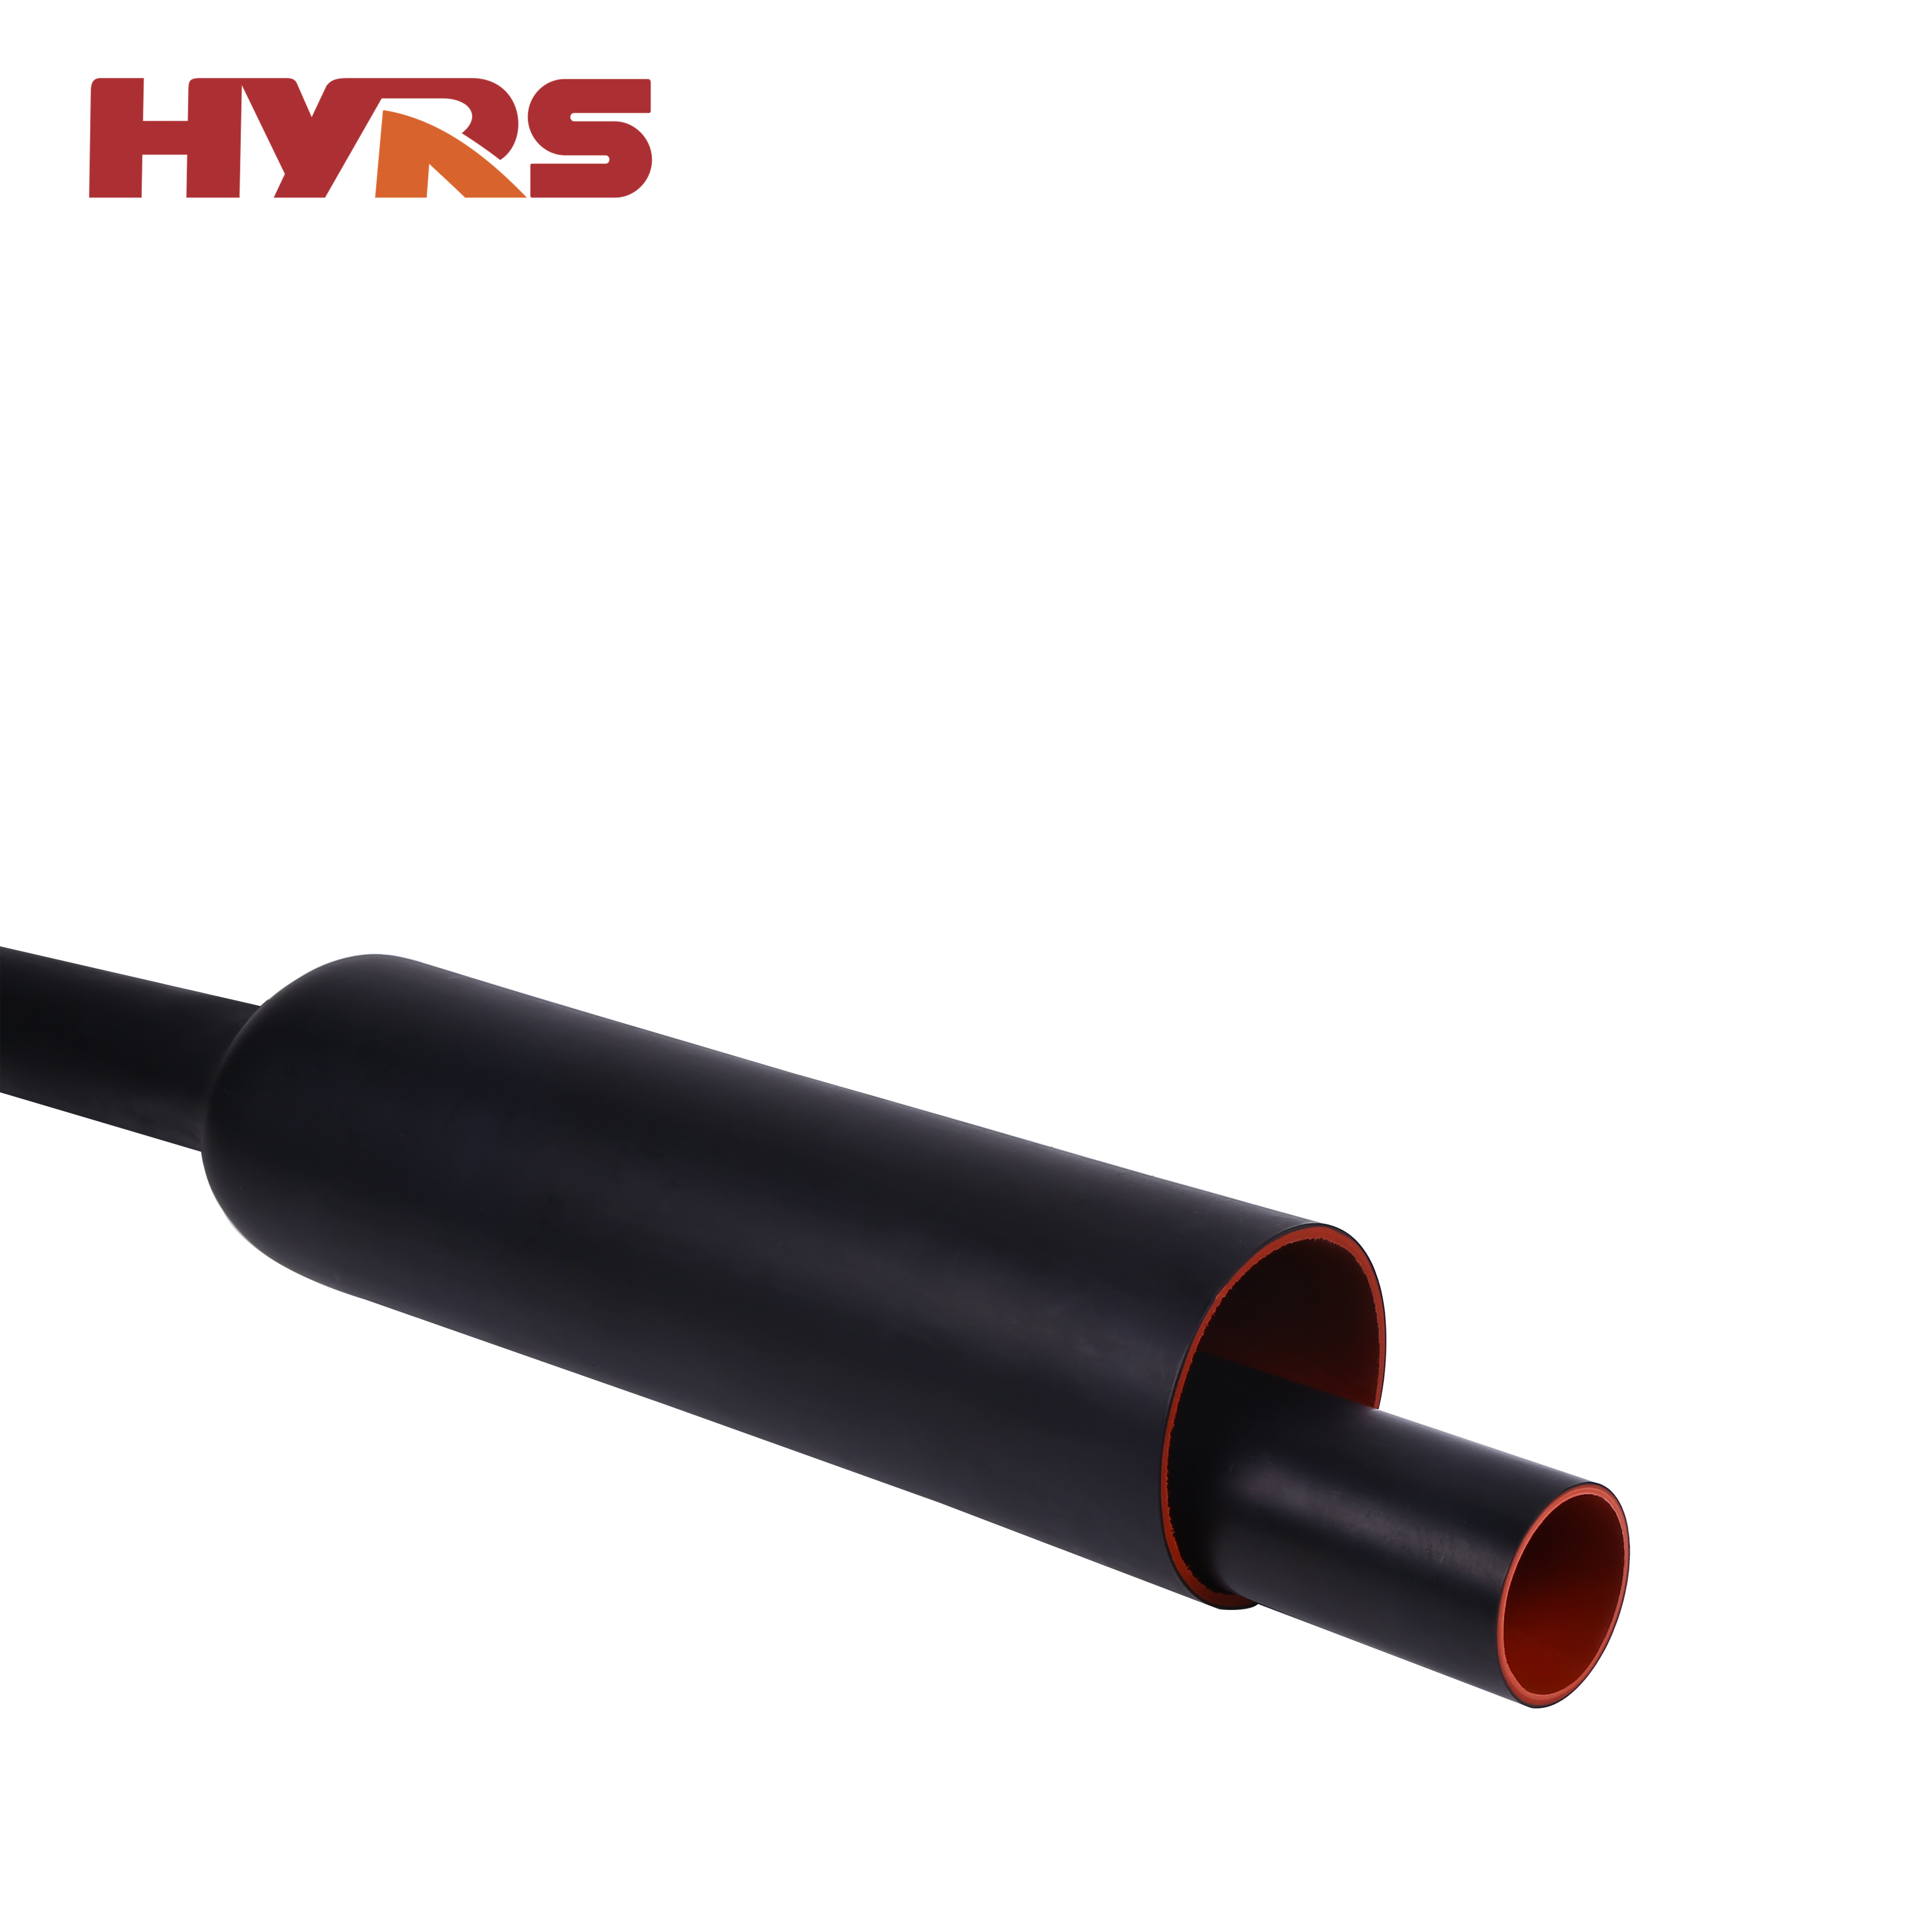 Reasons for using Heat Shrink Compound Tube